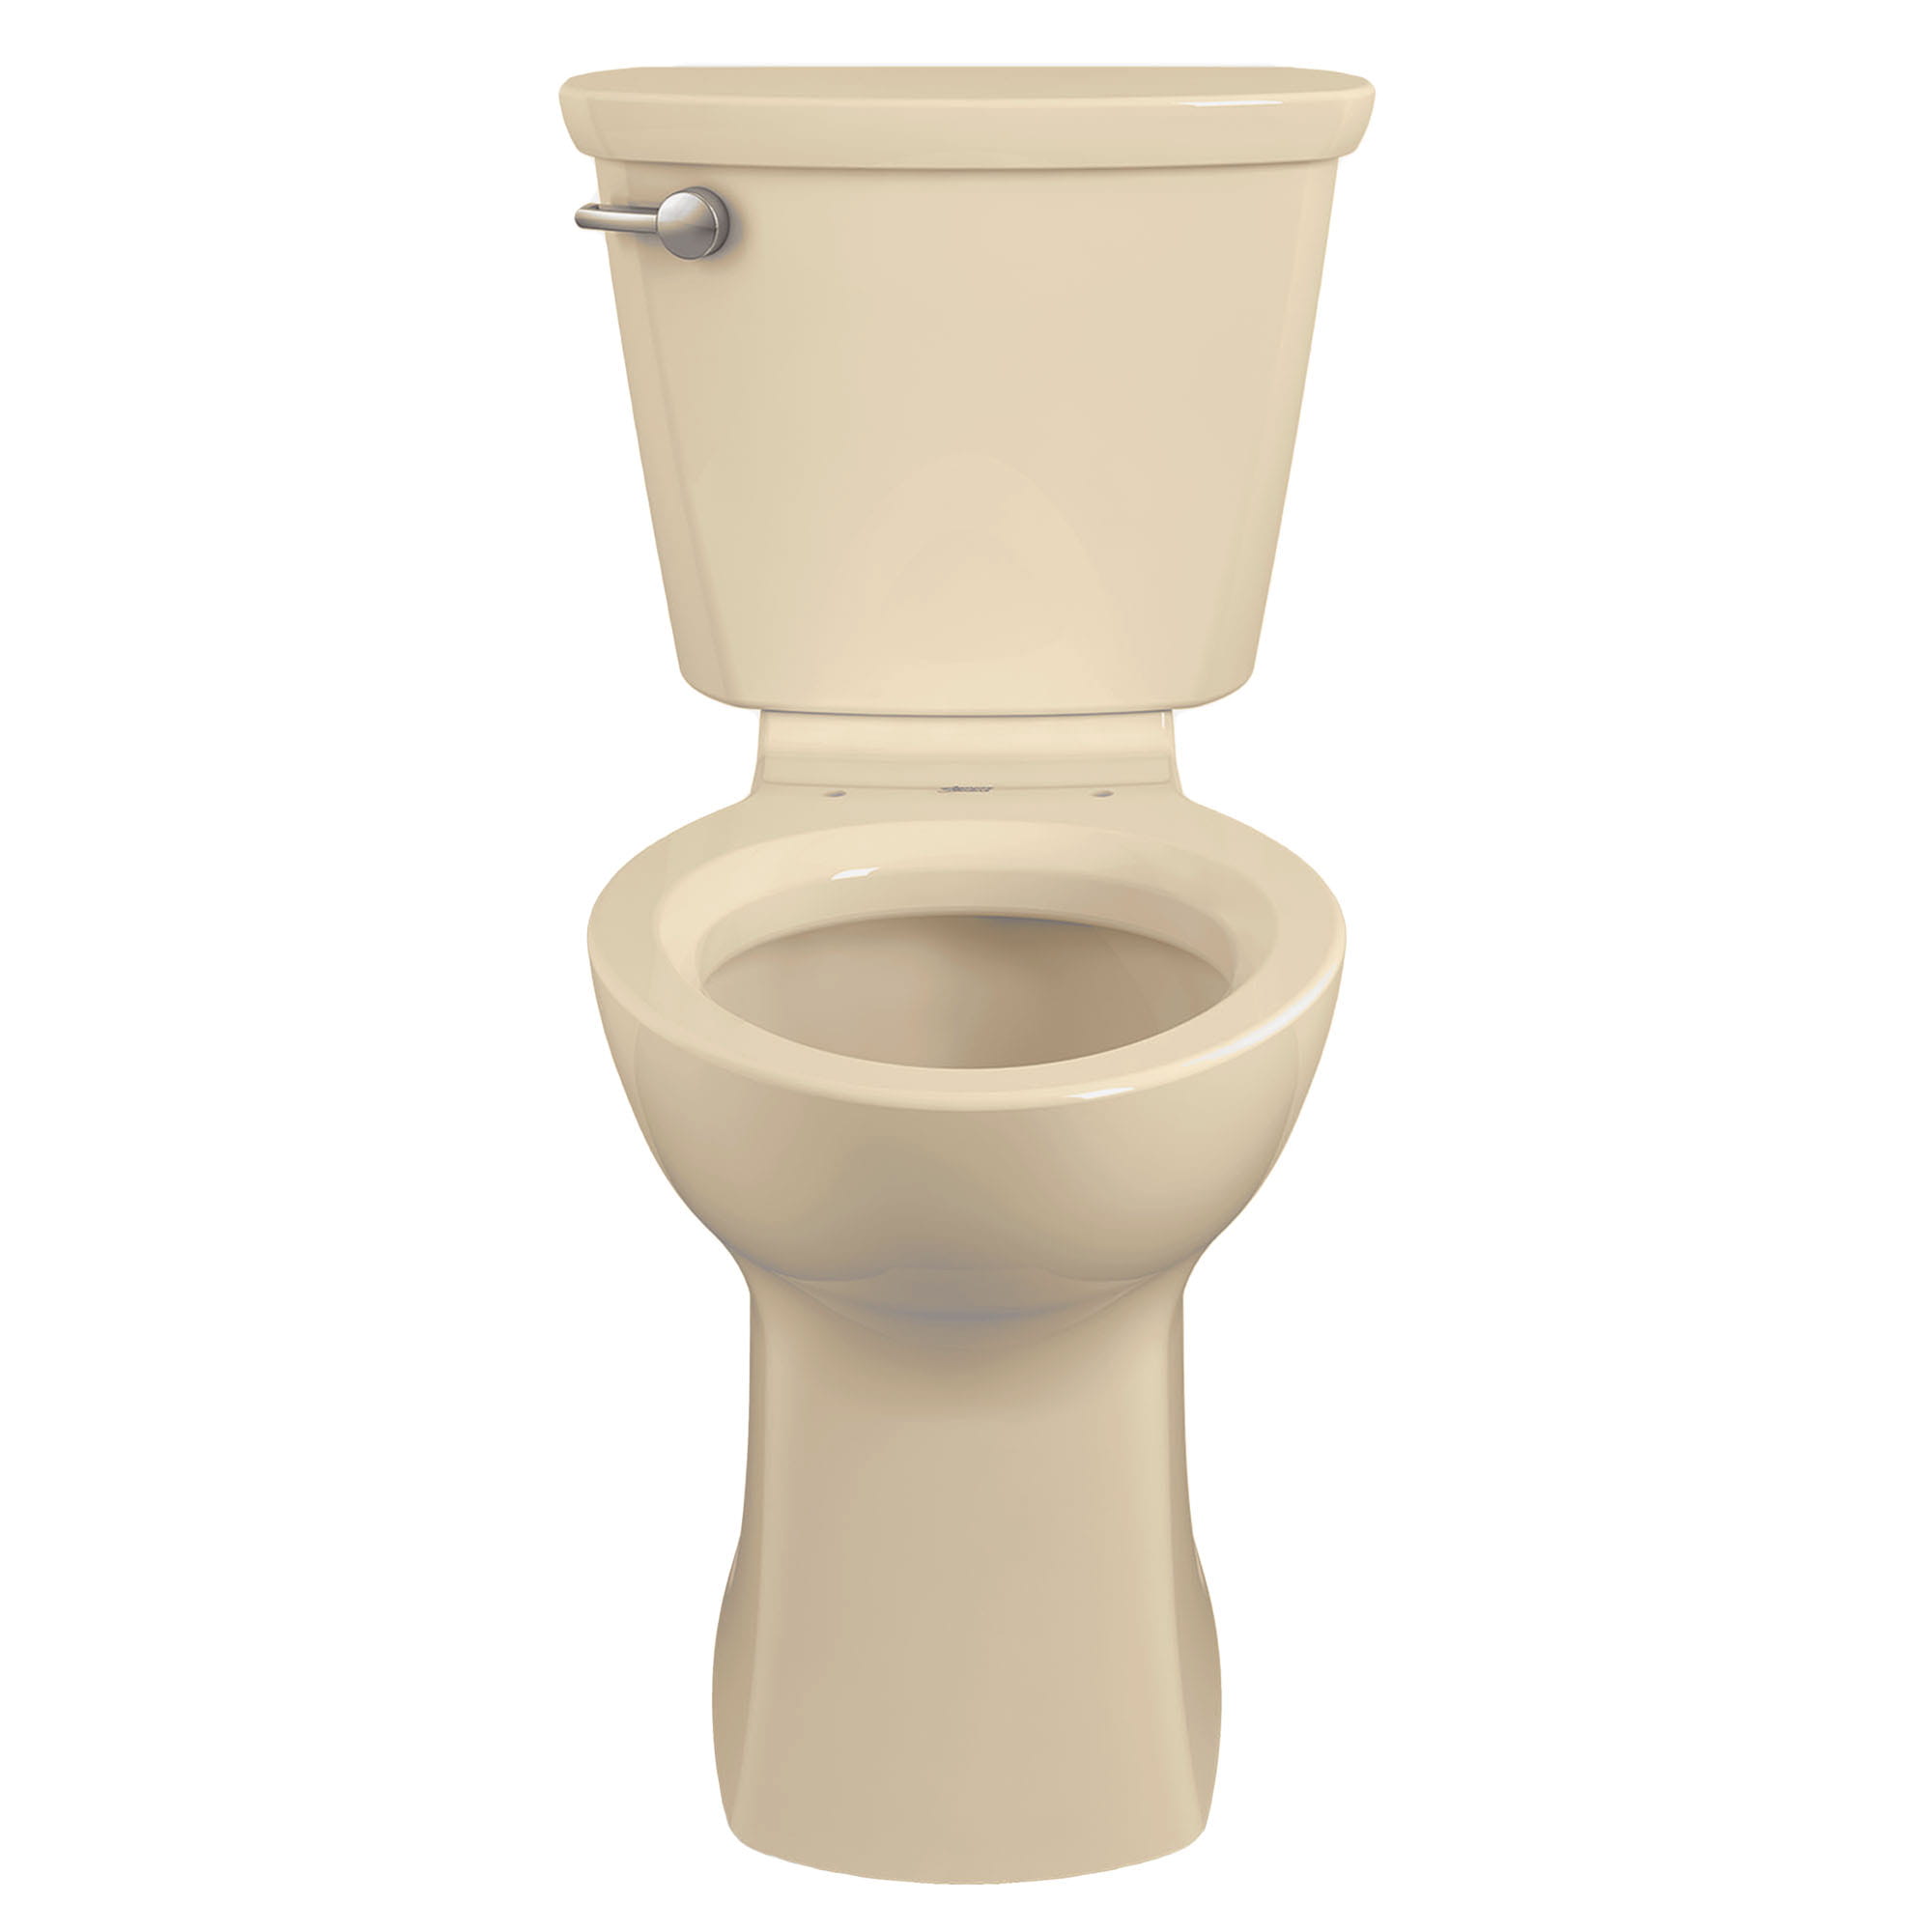 Cadet PRO Two Piece 16 gpf 60 Lpf Chair Height Elongated 10 Inch Rough Toilet Less Seat BONE